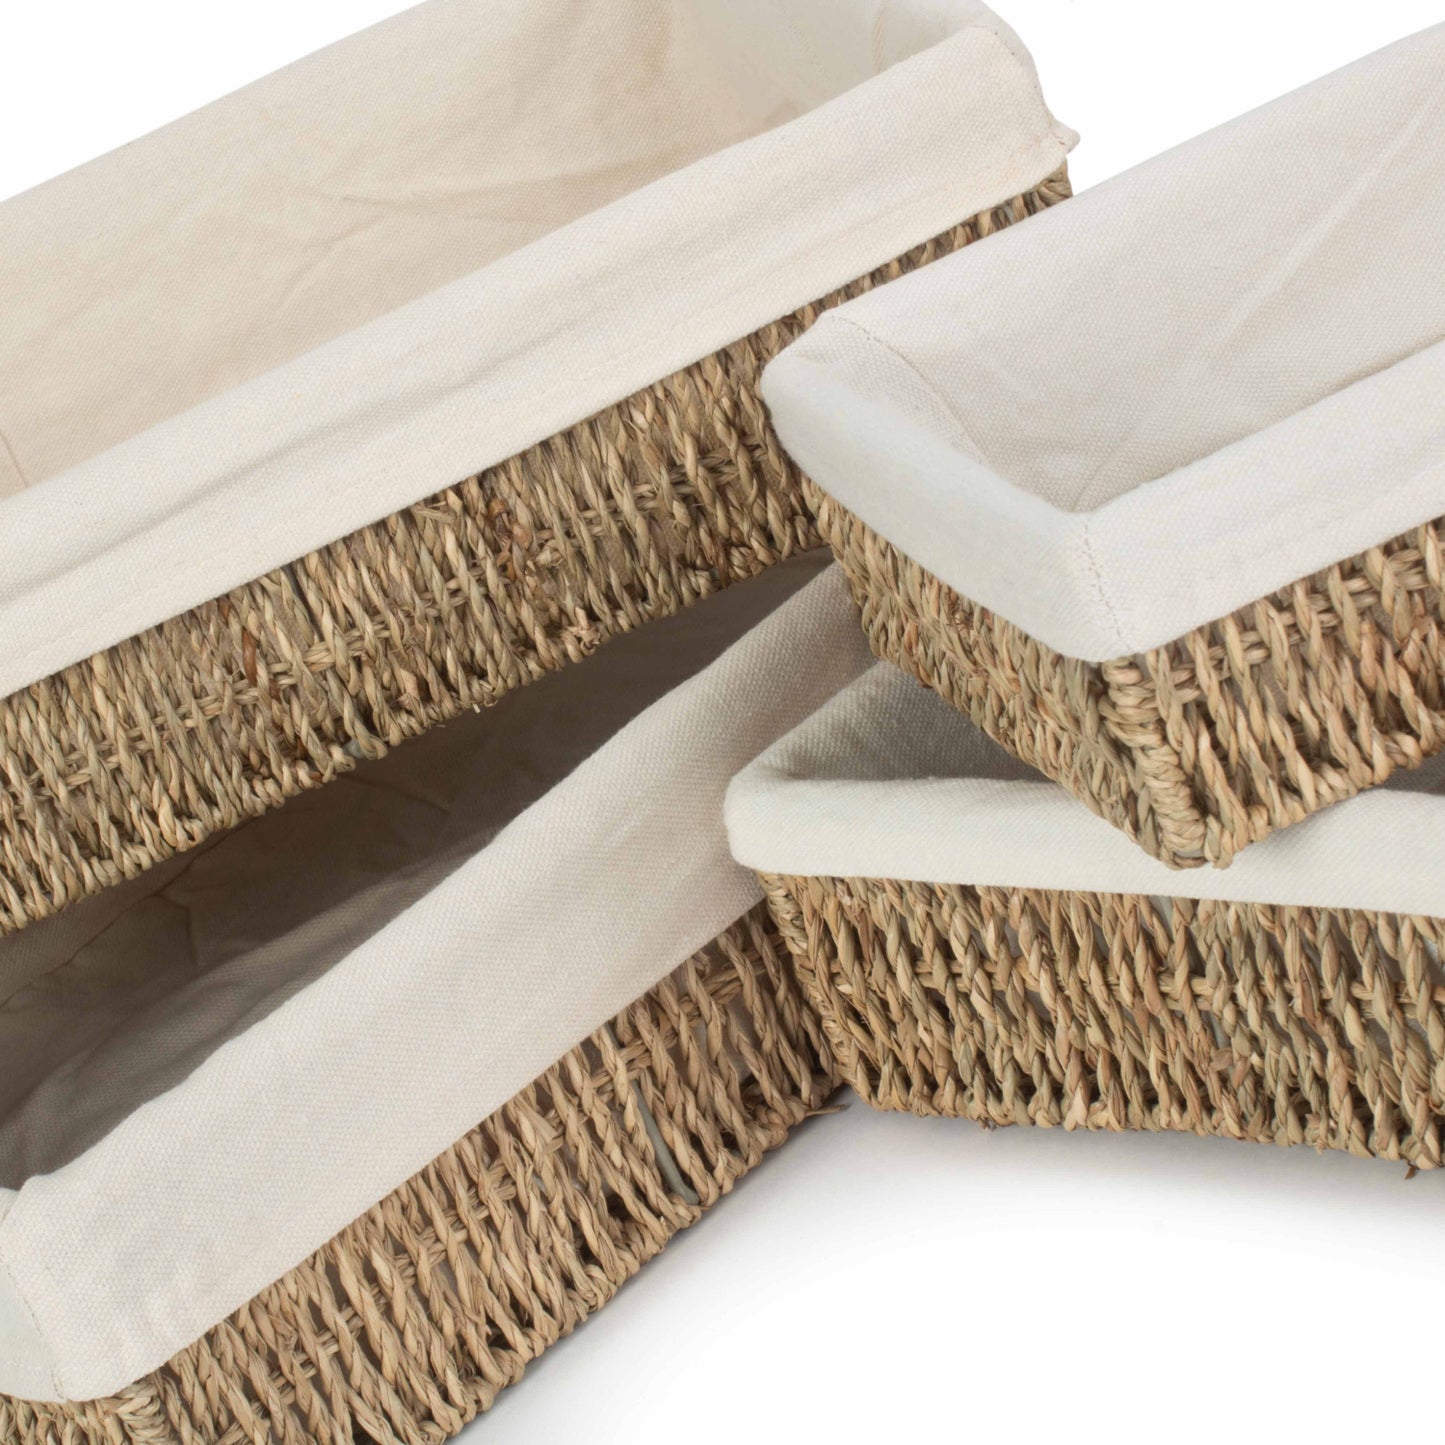 Set 4 Lined Rectangular Seagrass Trays